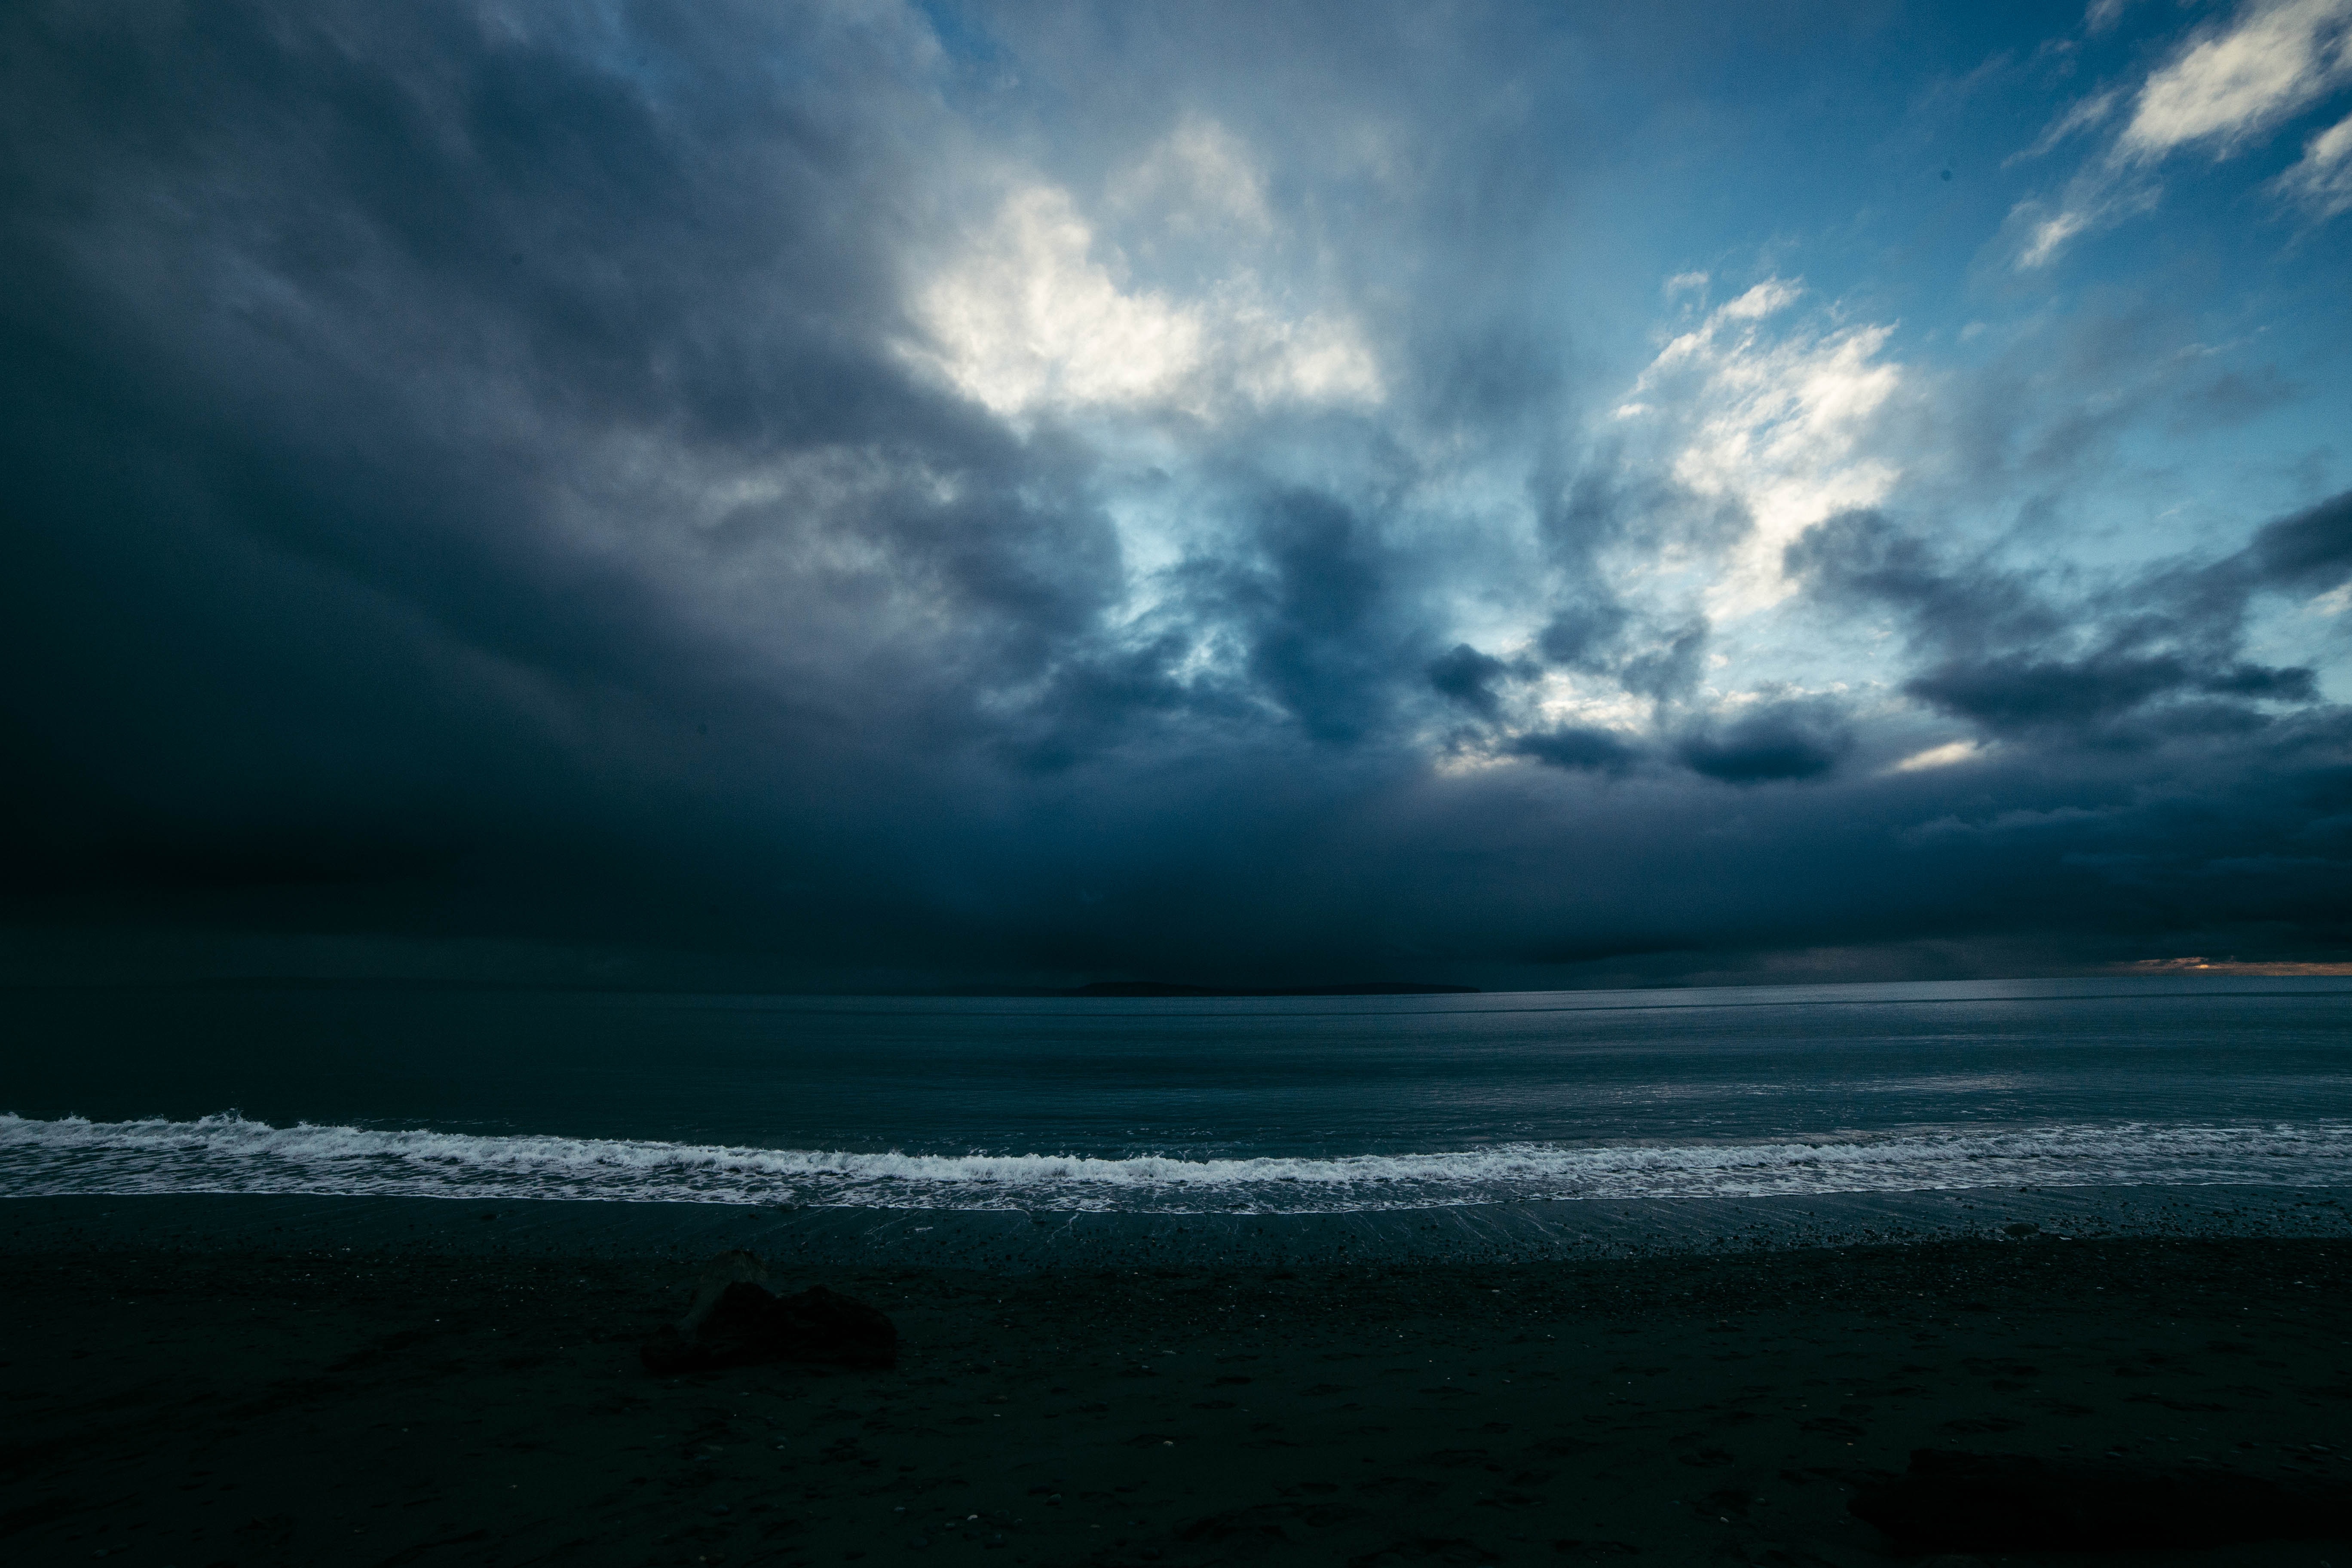 overcast, sea, nature, night, bank, shore, mainly cloudy, surf